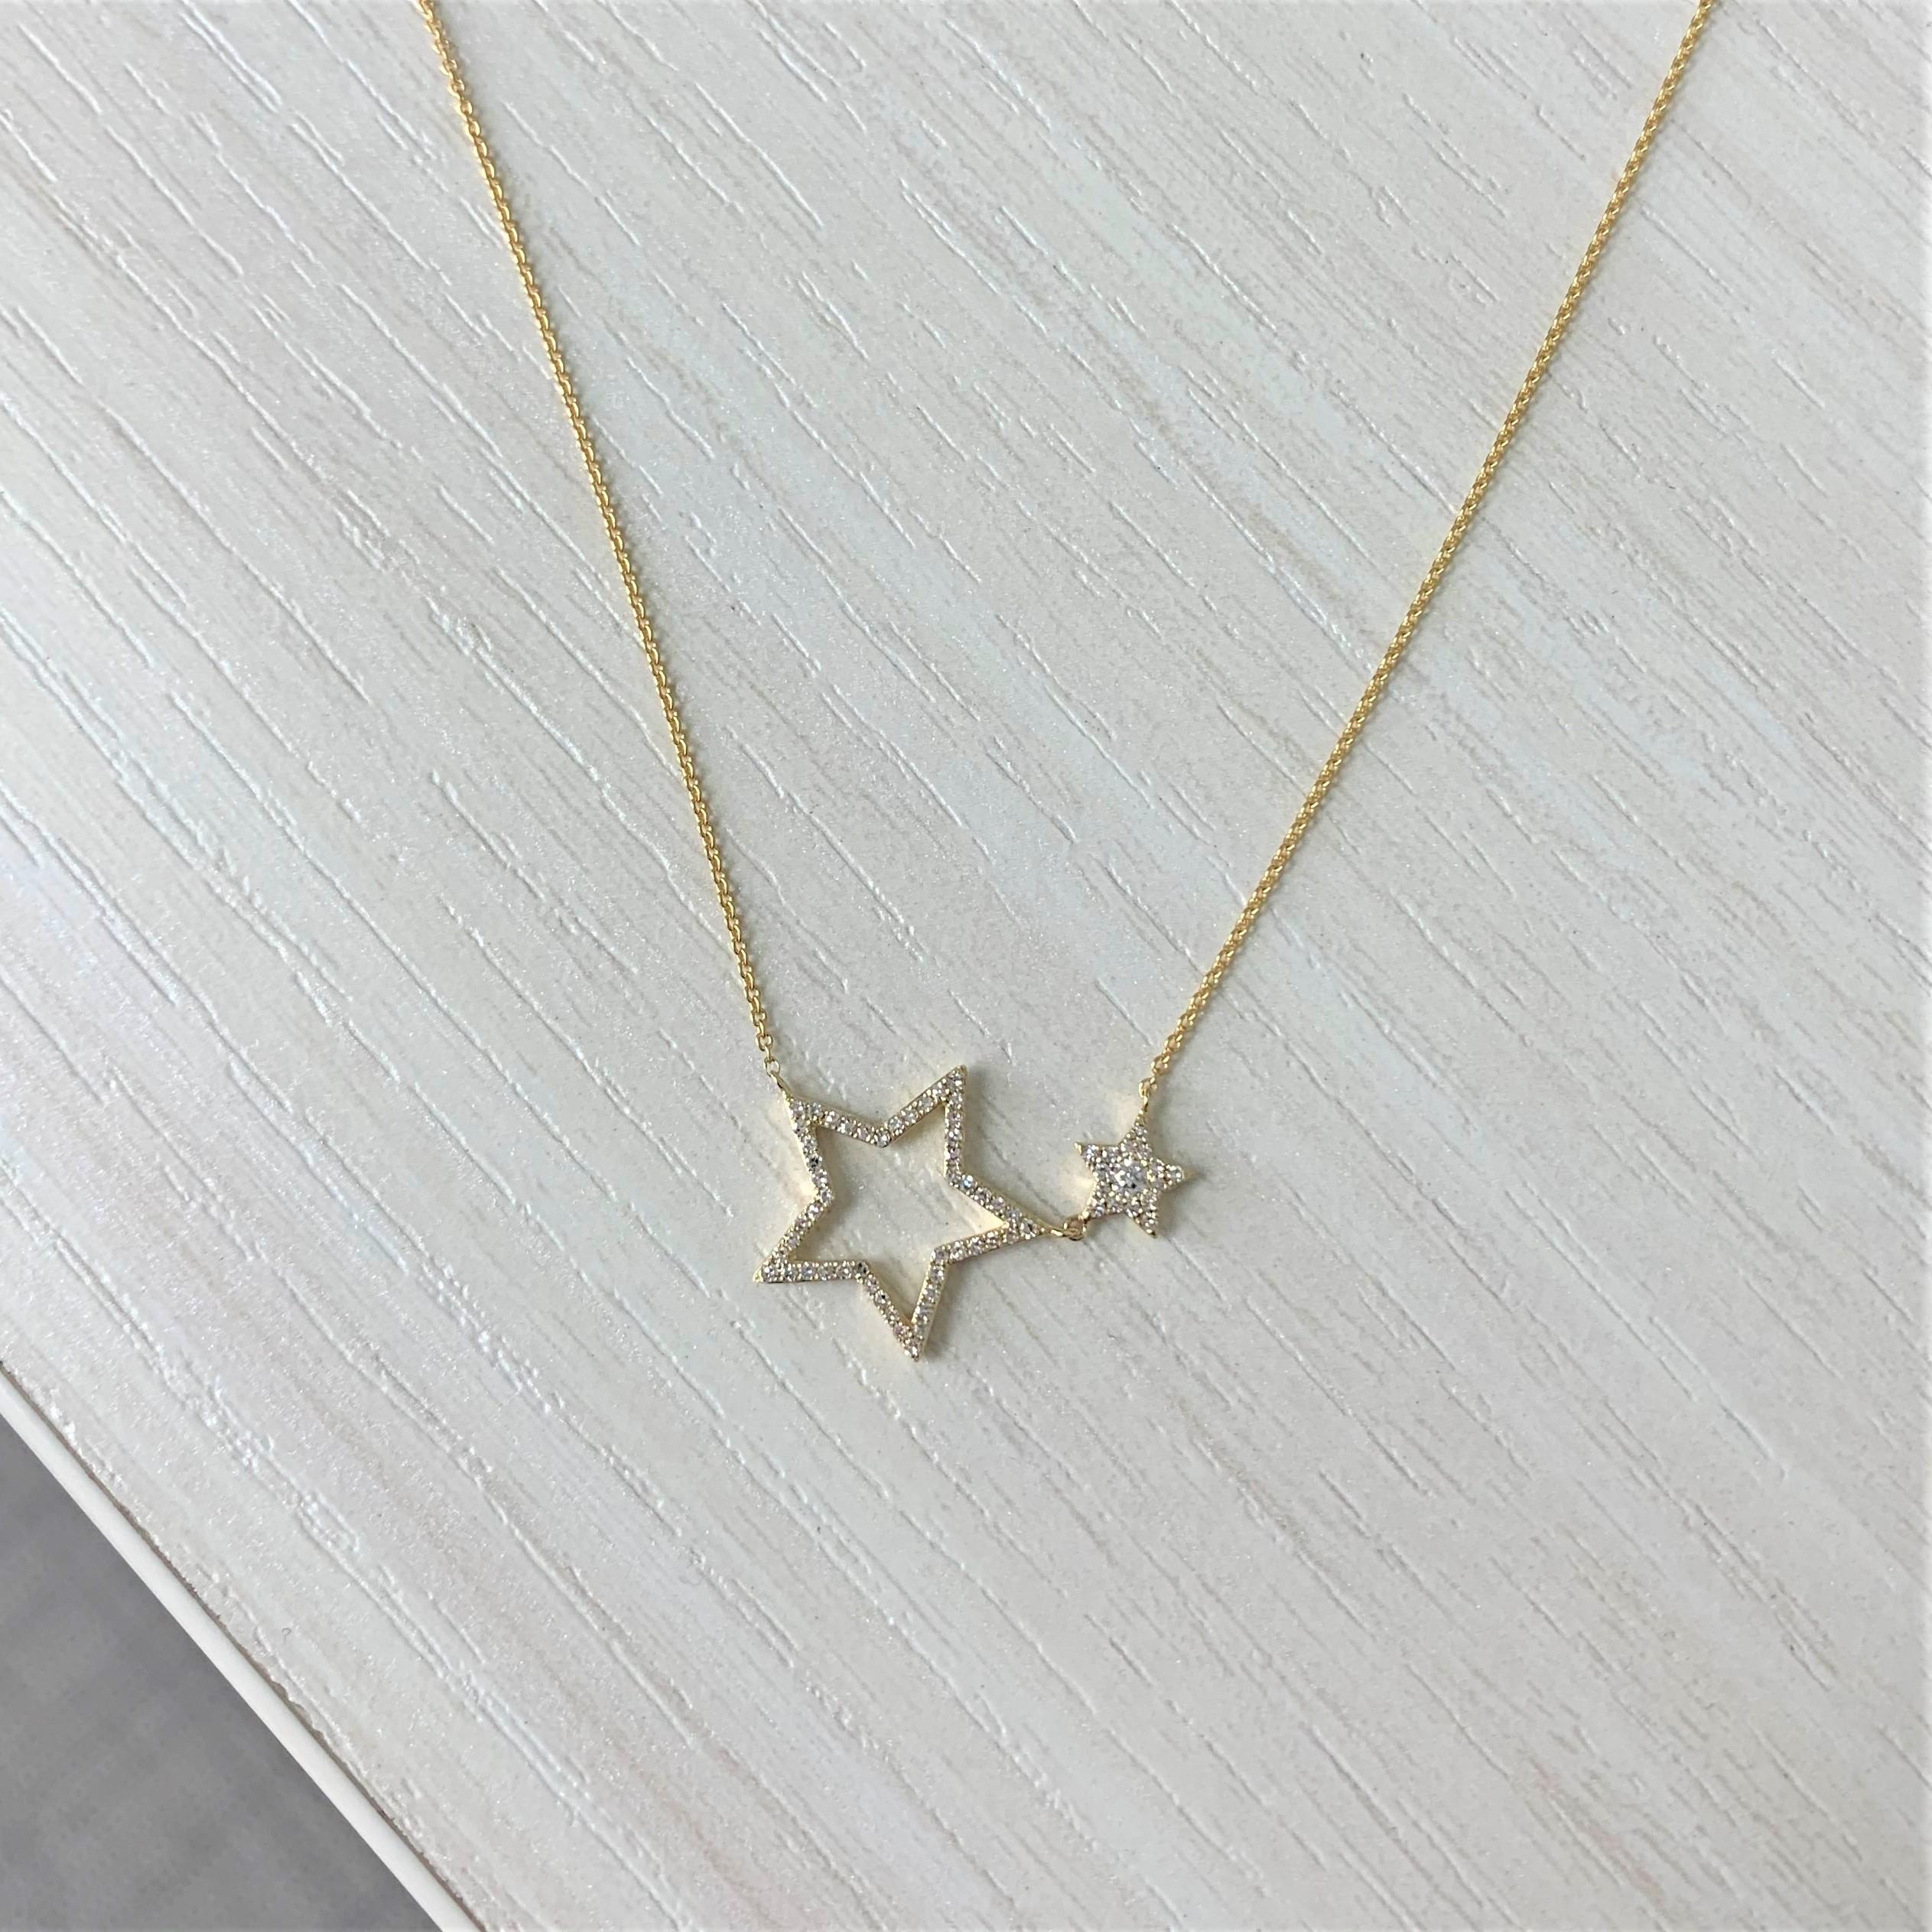 Contemporary 14K Yellow Gold 0.22 Carat Diamond Star Necklace For Sale